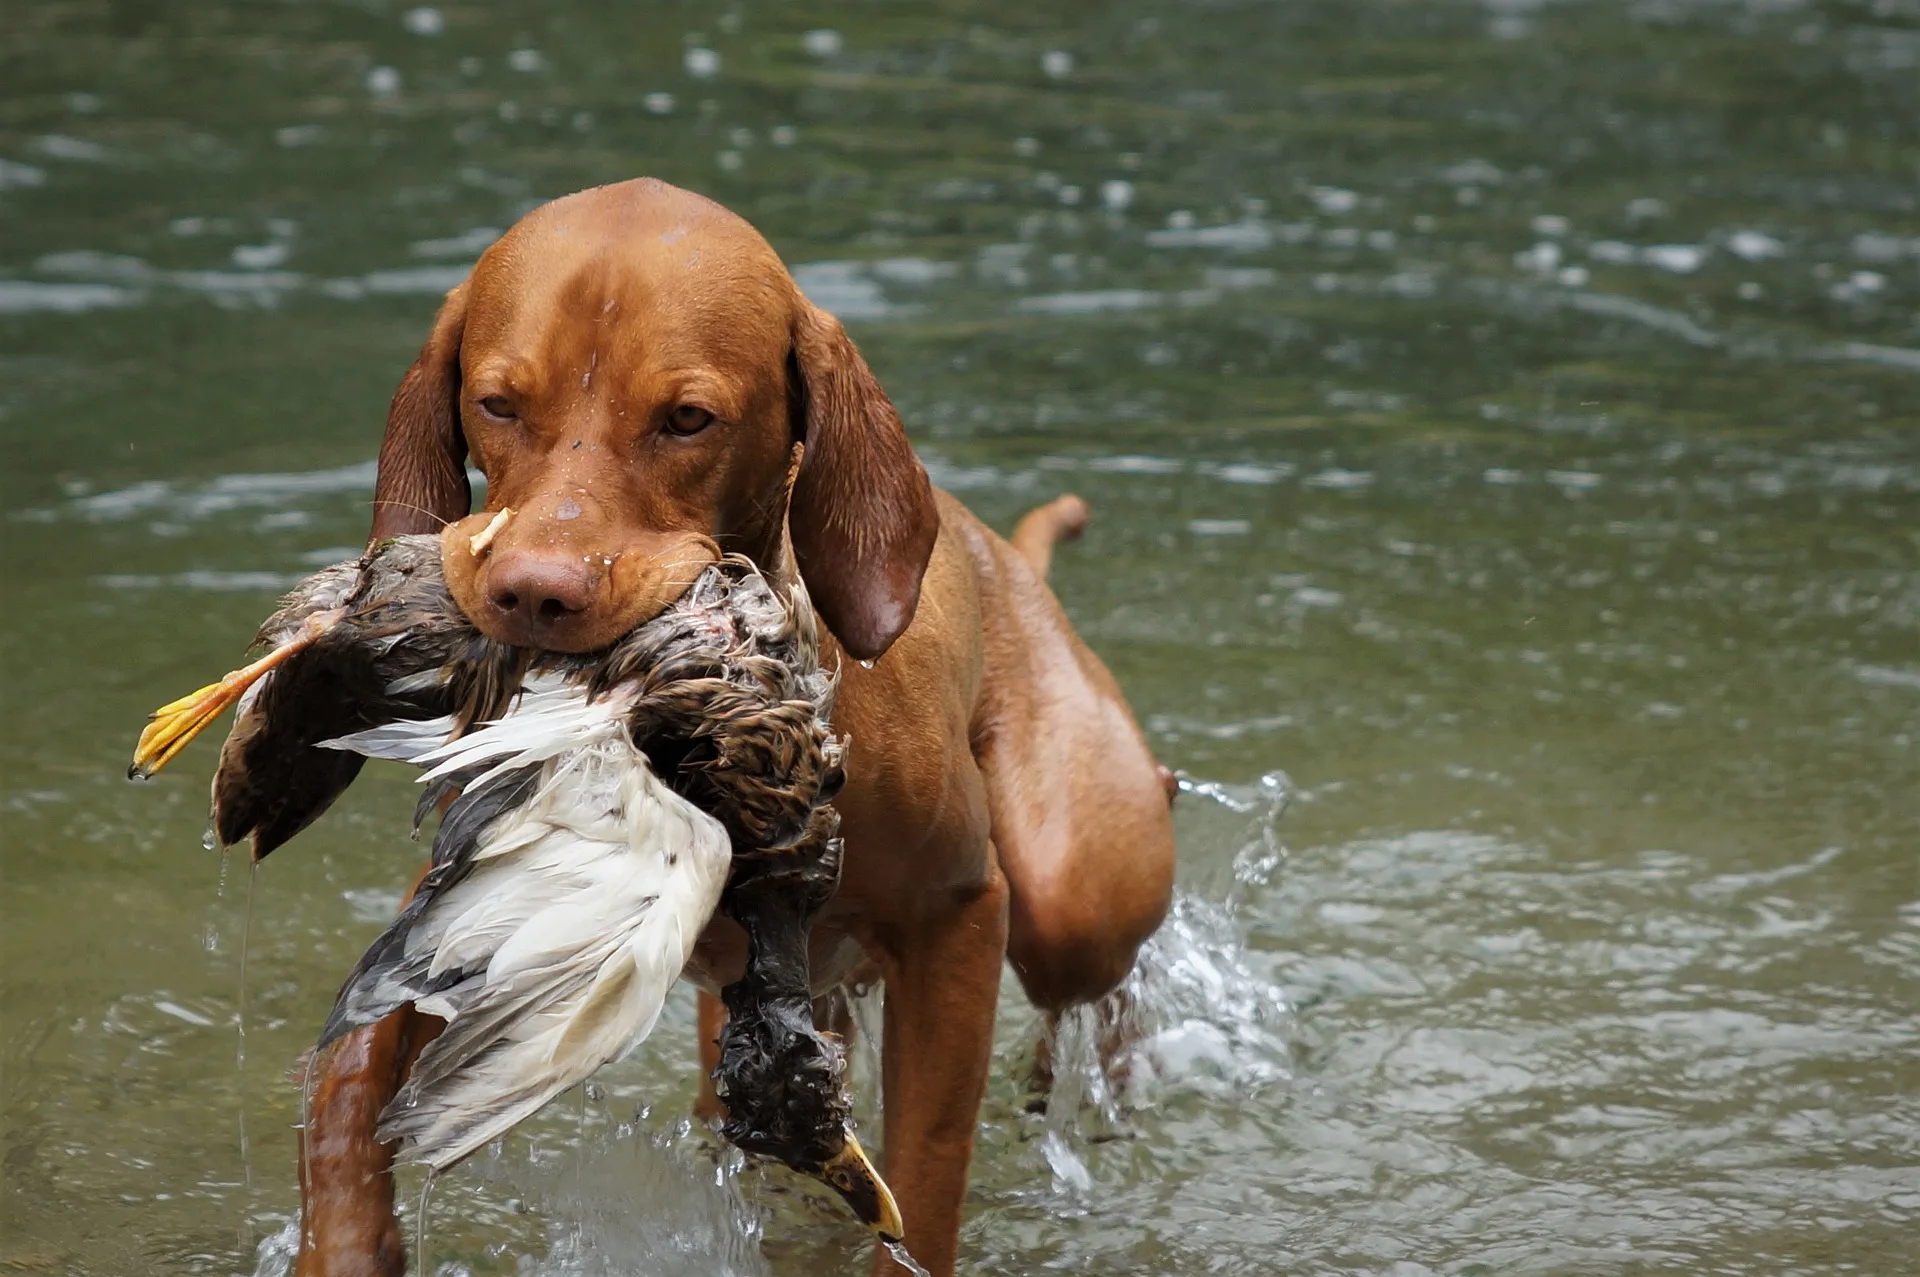 This is a hunting breed, so don’t underestimate the strong prey drive of the Vizsla. 